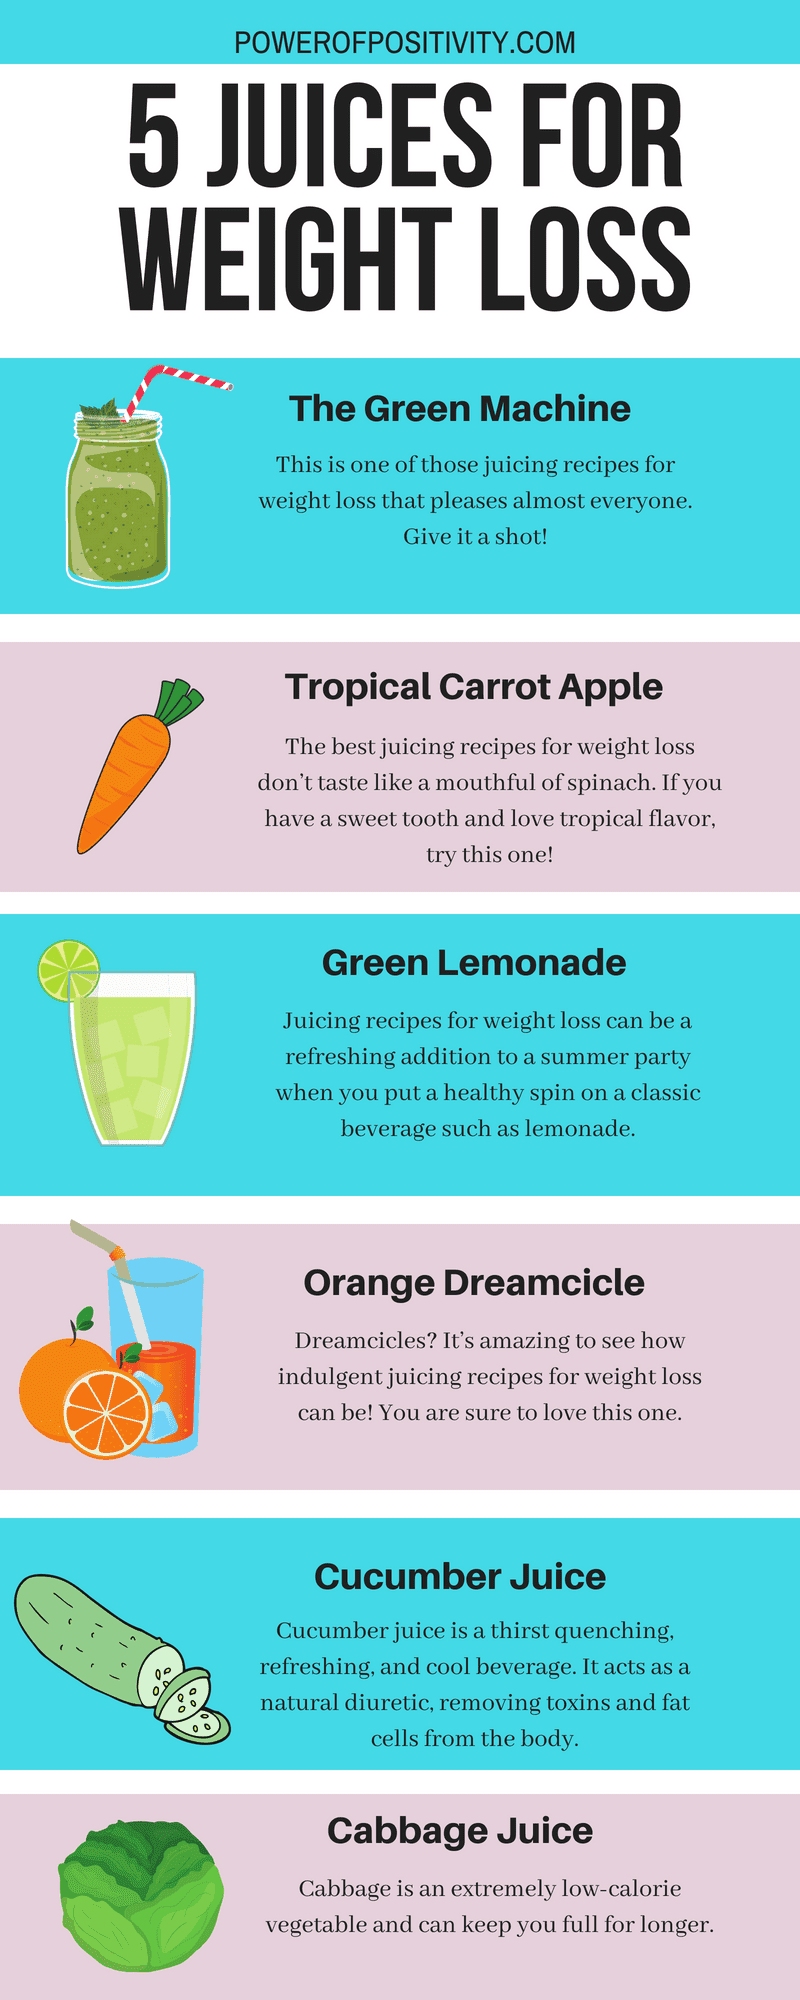 Juices for weight loss